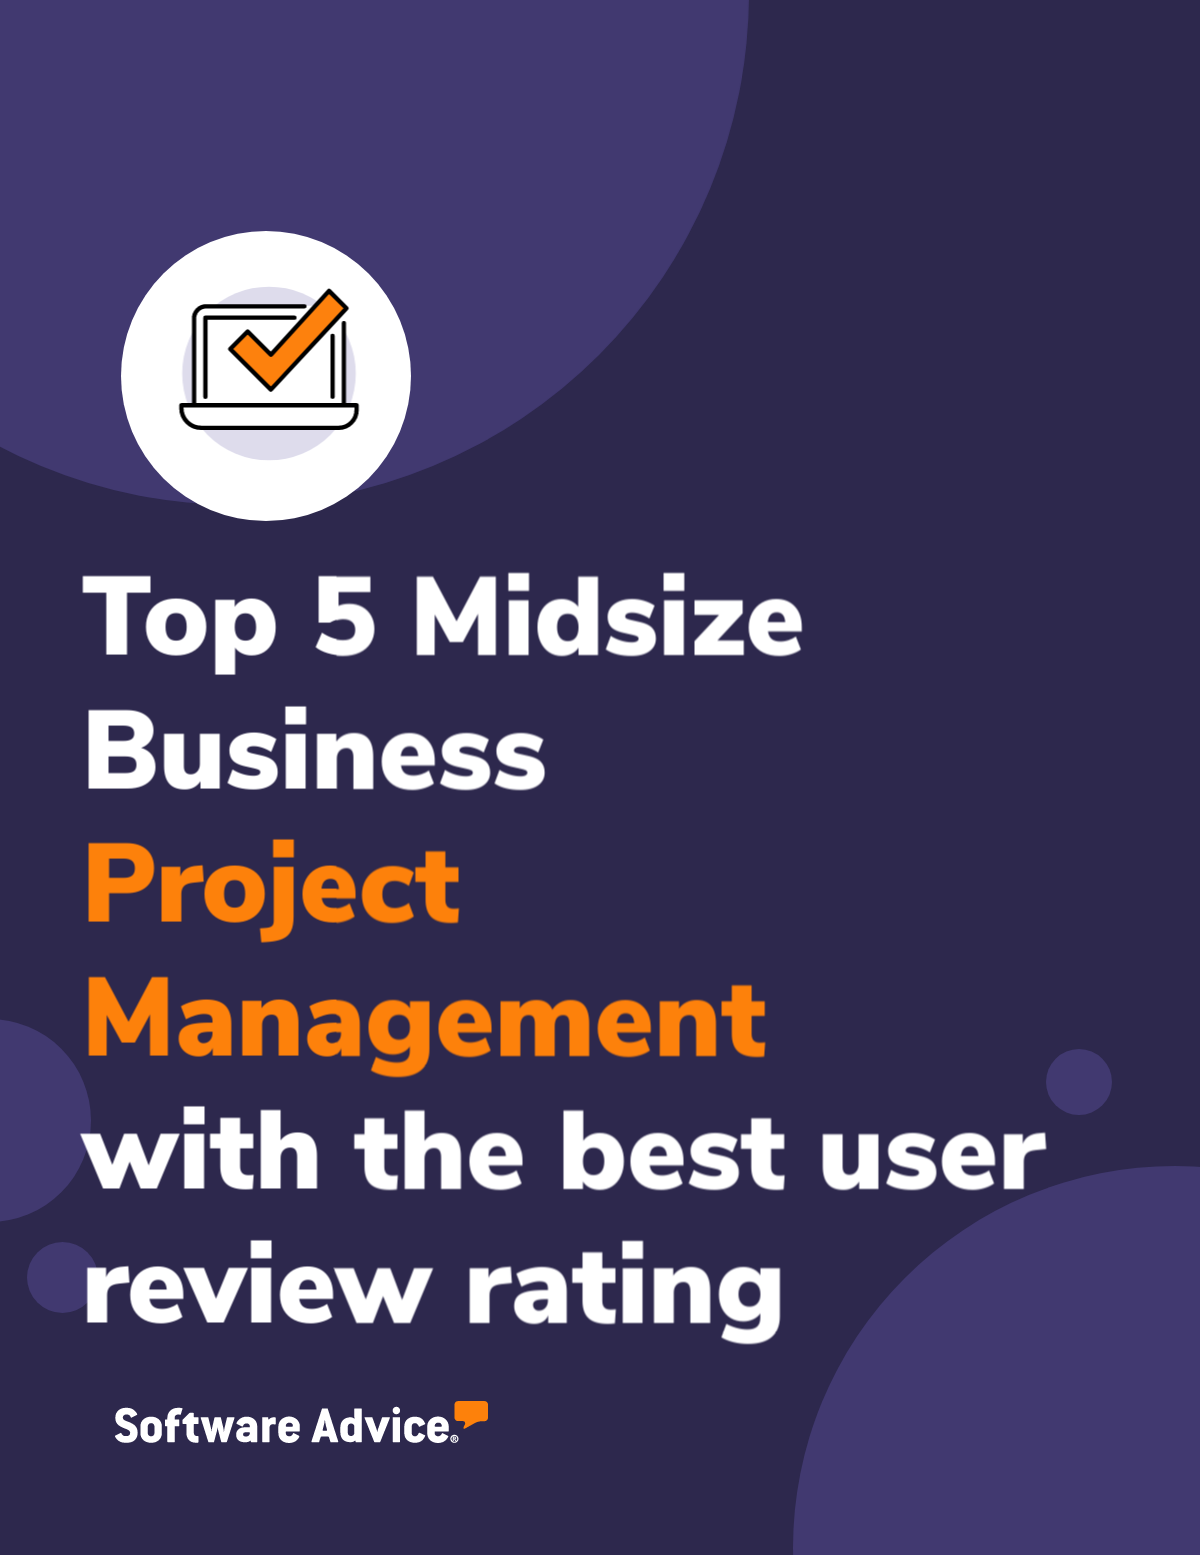 Top 5 Midsize Business Project Management Software With the Best User Reviewed Overall Rating